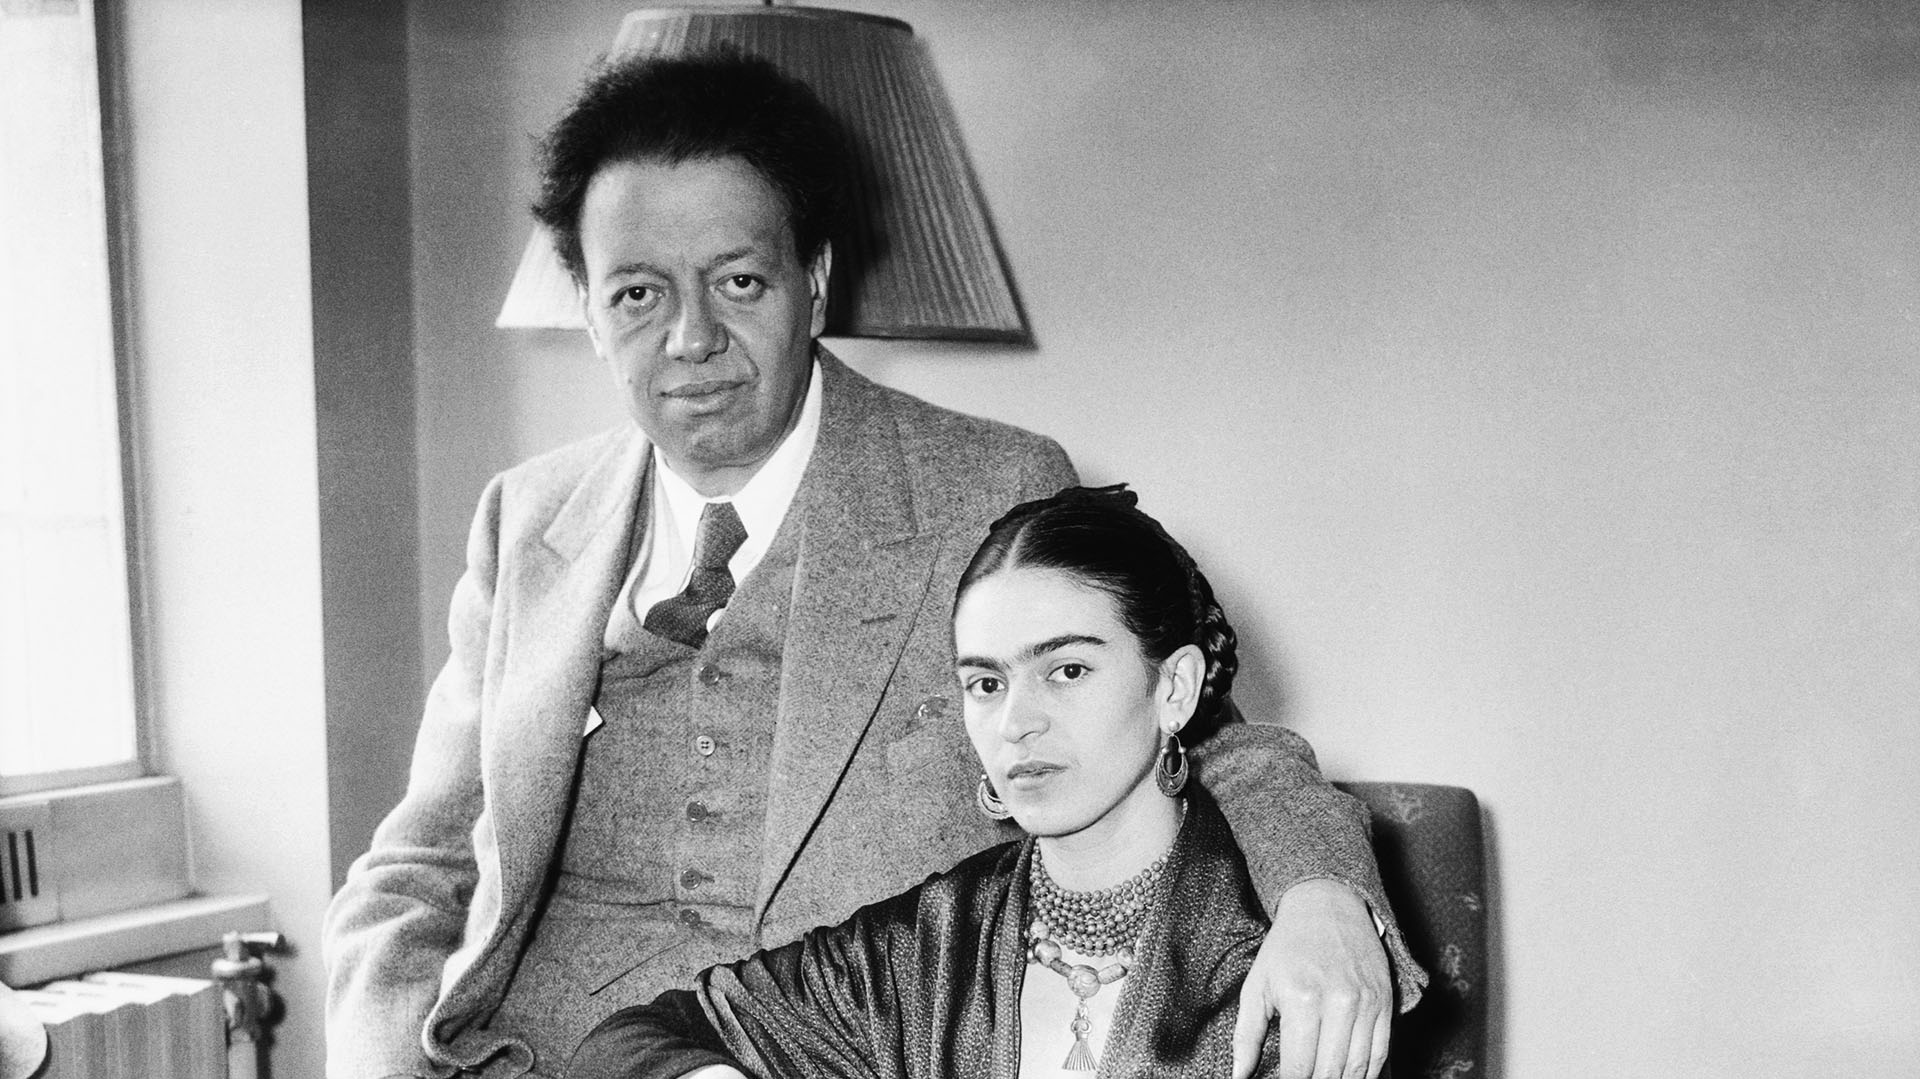 (Original Caption) 12/8/1939-Mexico City, Mexico- Diego Rivera, celebrated artist and dissident Communist, who charged, Dec. 8, that German Nazis and Stalin Communists were "converging" Mexico into a base of operations against all of the Americas, especially Mexico and the United States. He is pictured here with his wife, Mexican painter Frida Kahlo.